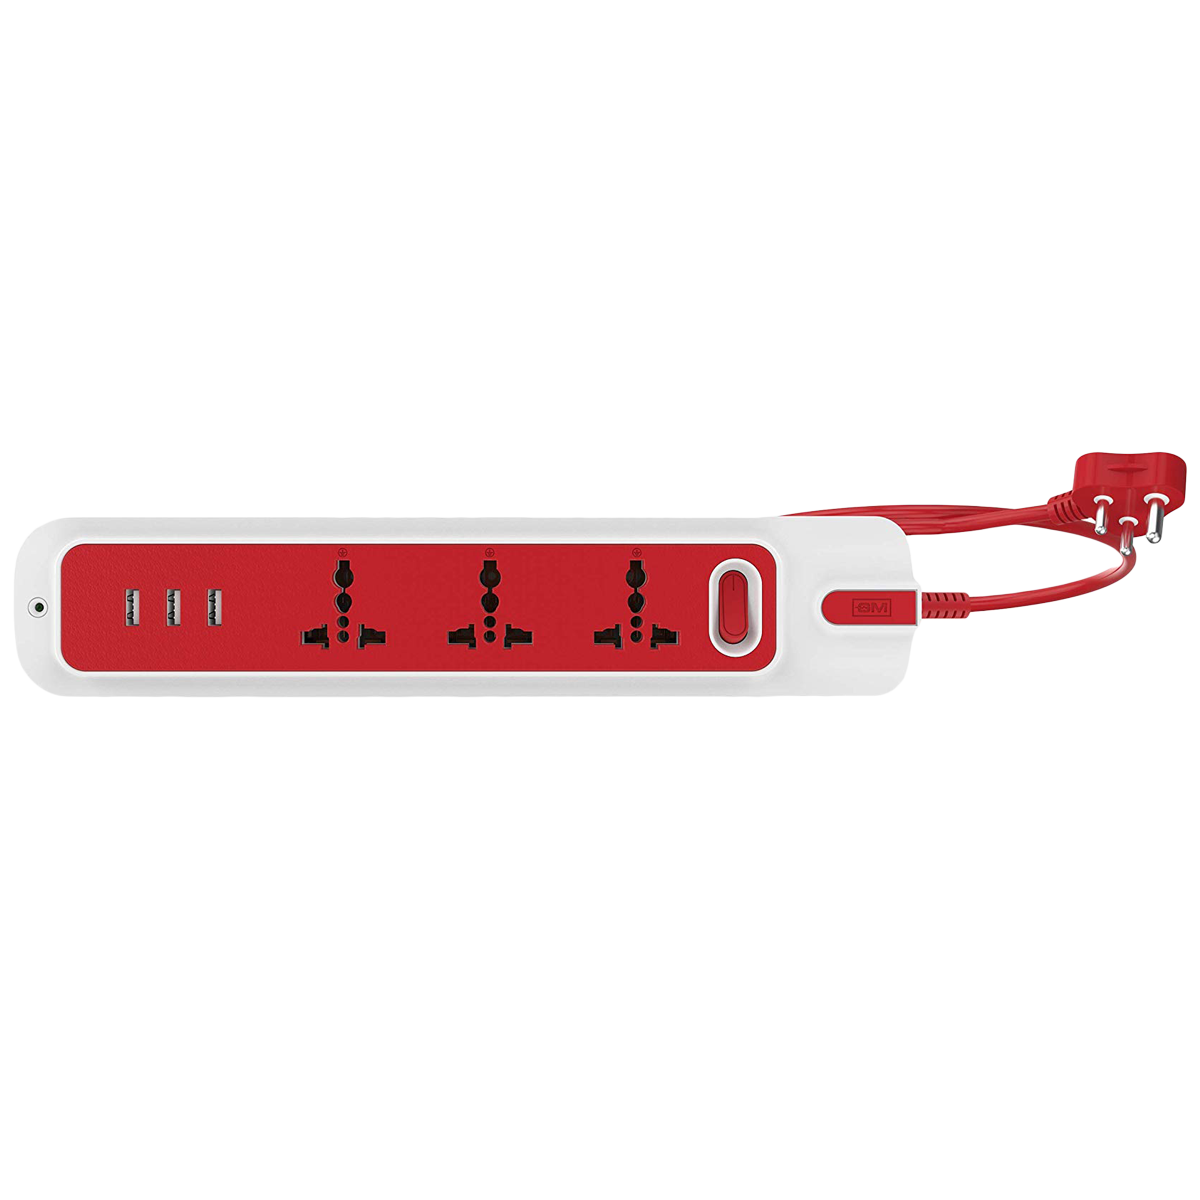 GM Lemoid 10 Amps 3 Sockets Surge Protector (2.1 Meters, 3260, White/Red)